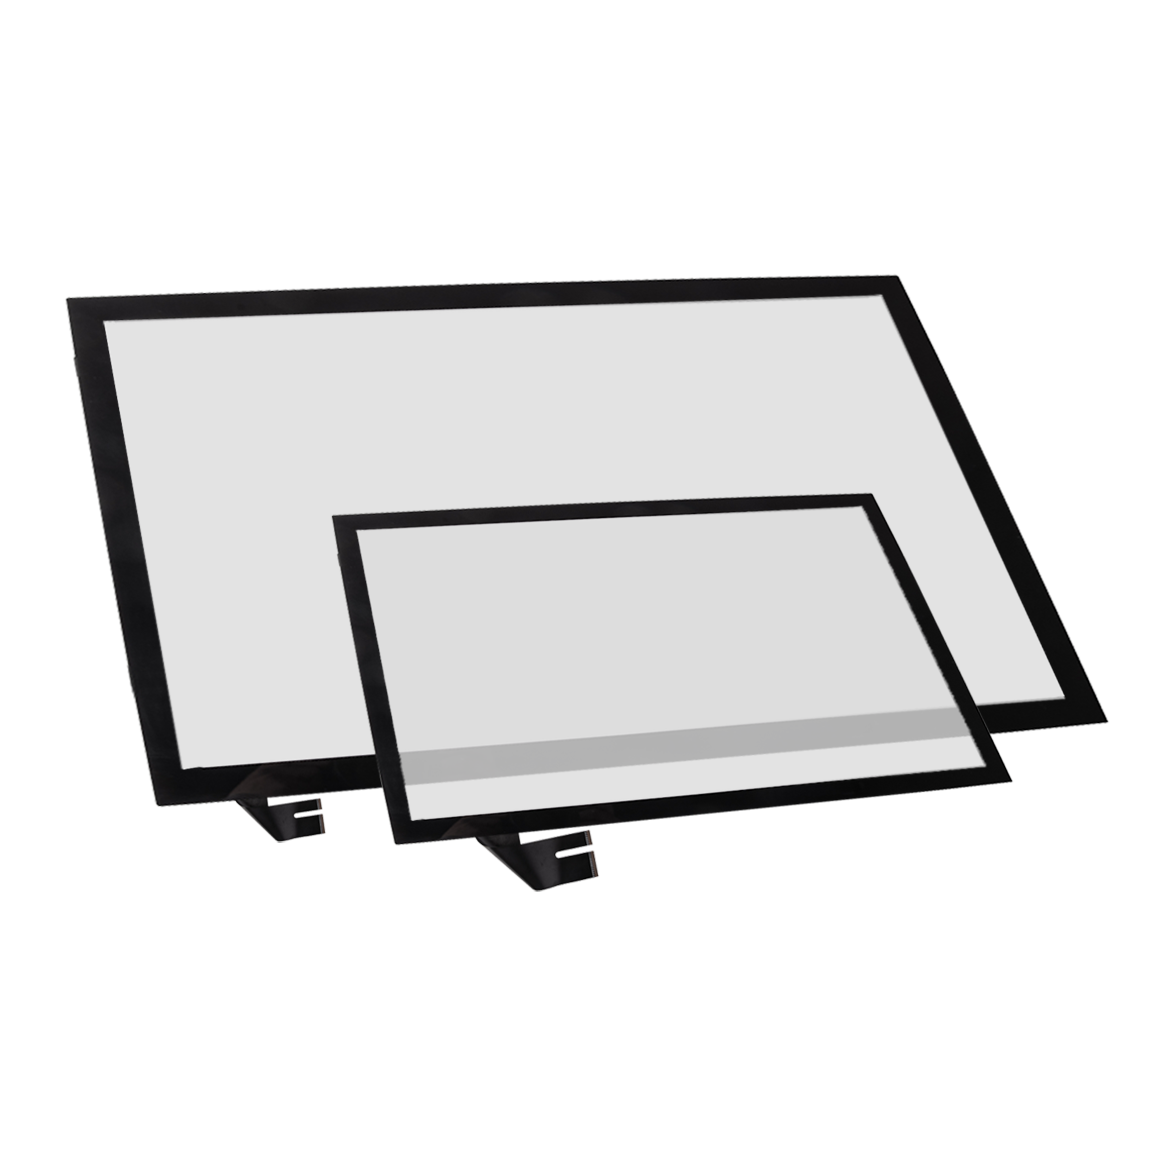 17inch PCAP Touch Panel Featured Hoton